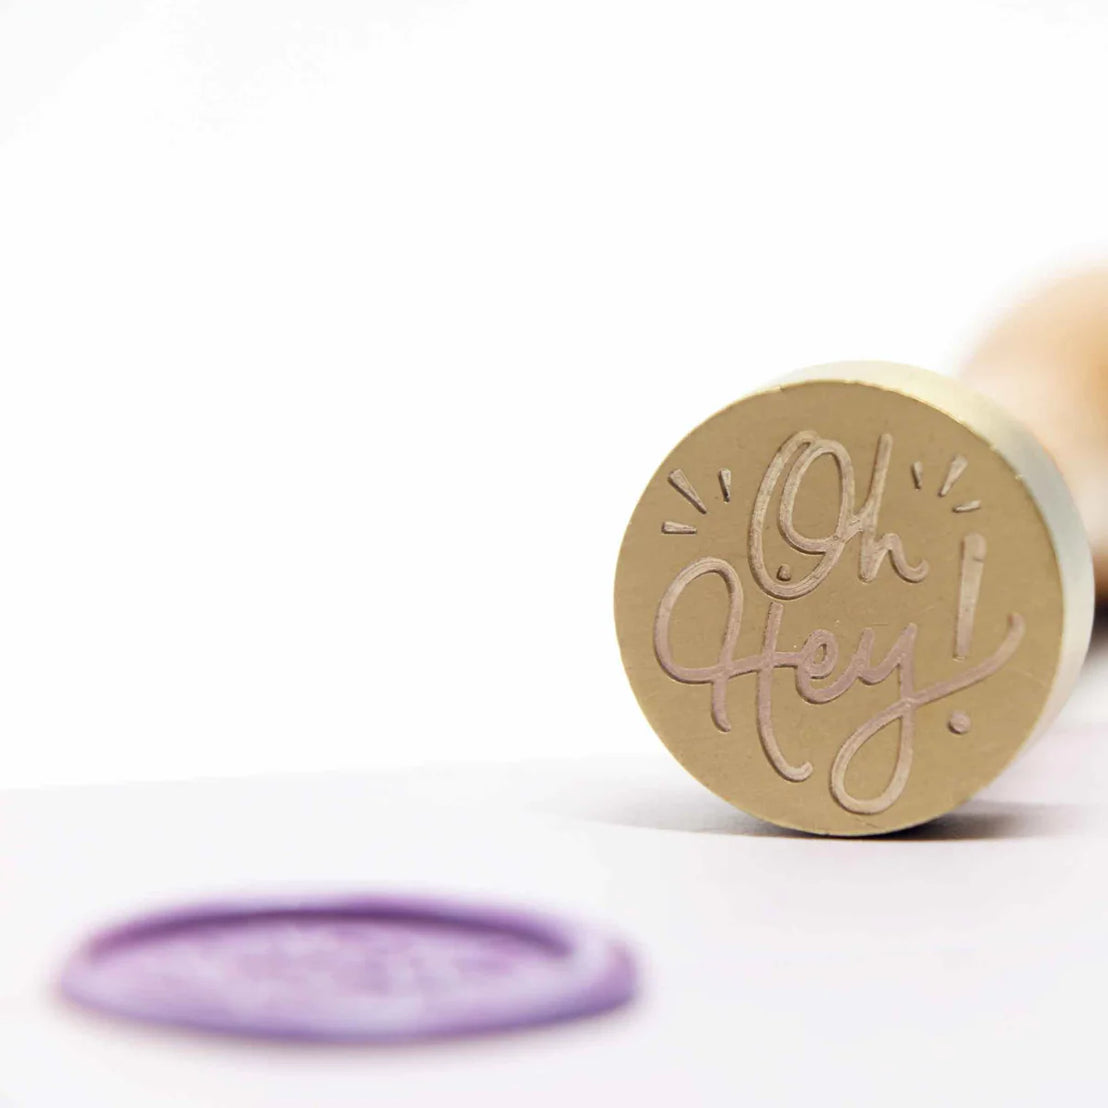 Oh Hey! Wax Seal Stamp